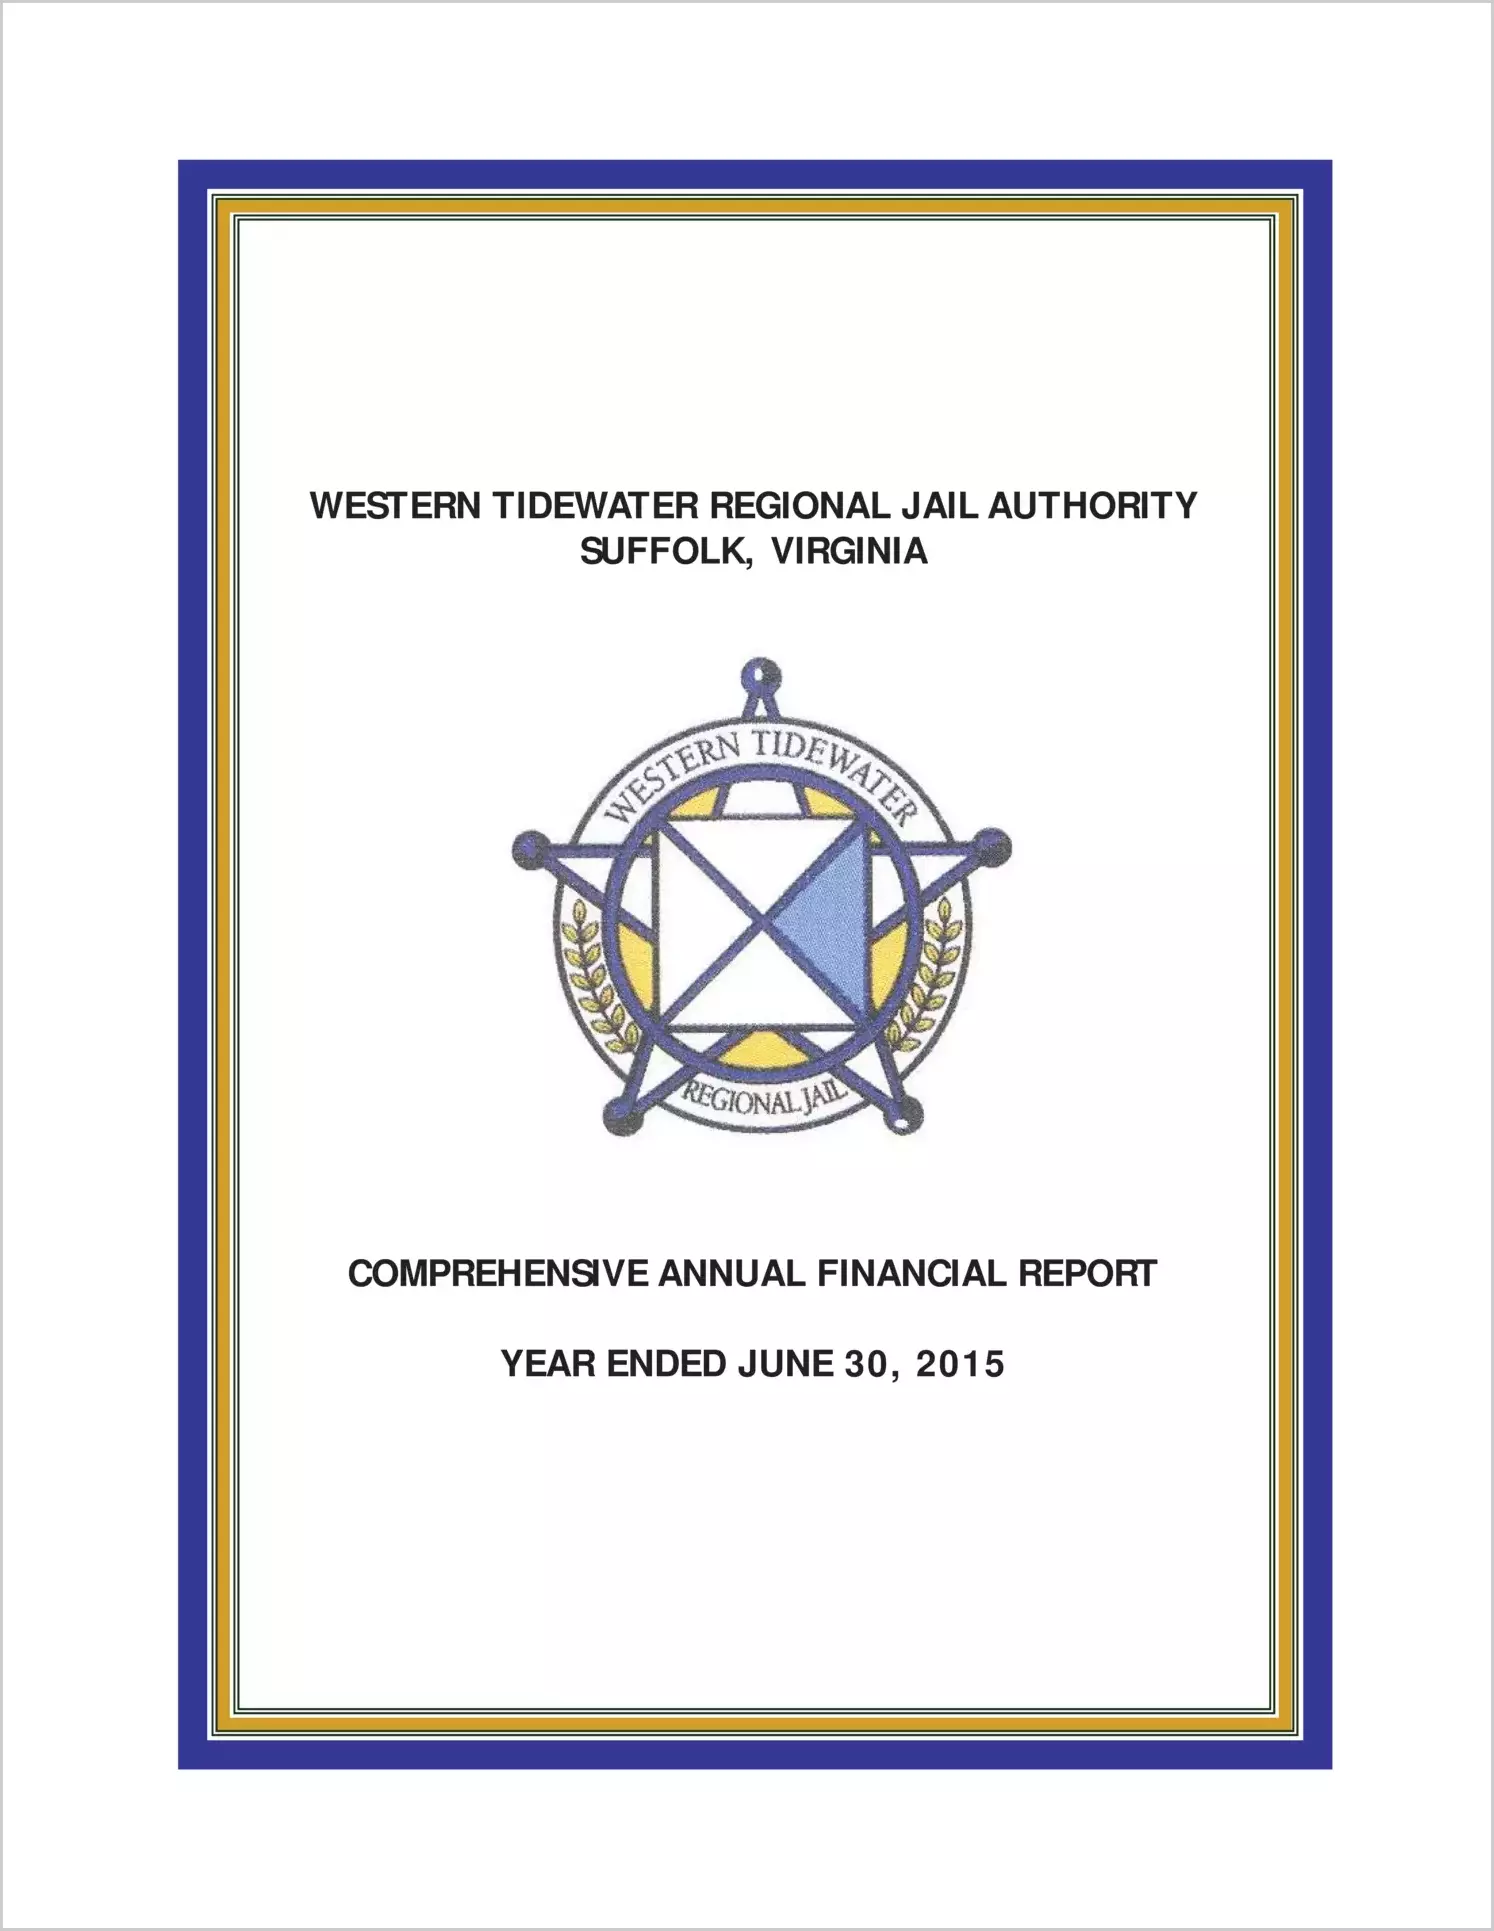 2015 ABC/Other Annual Financial Report  for Western Tidewater Regional Jail Authority